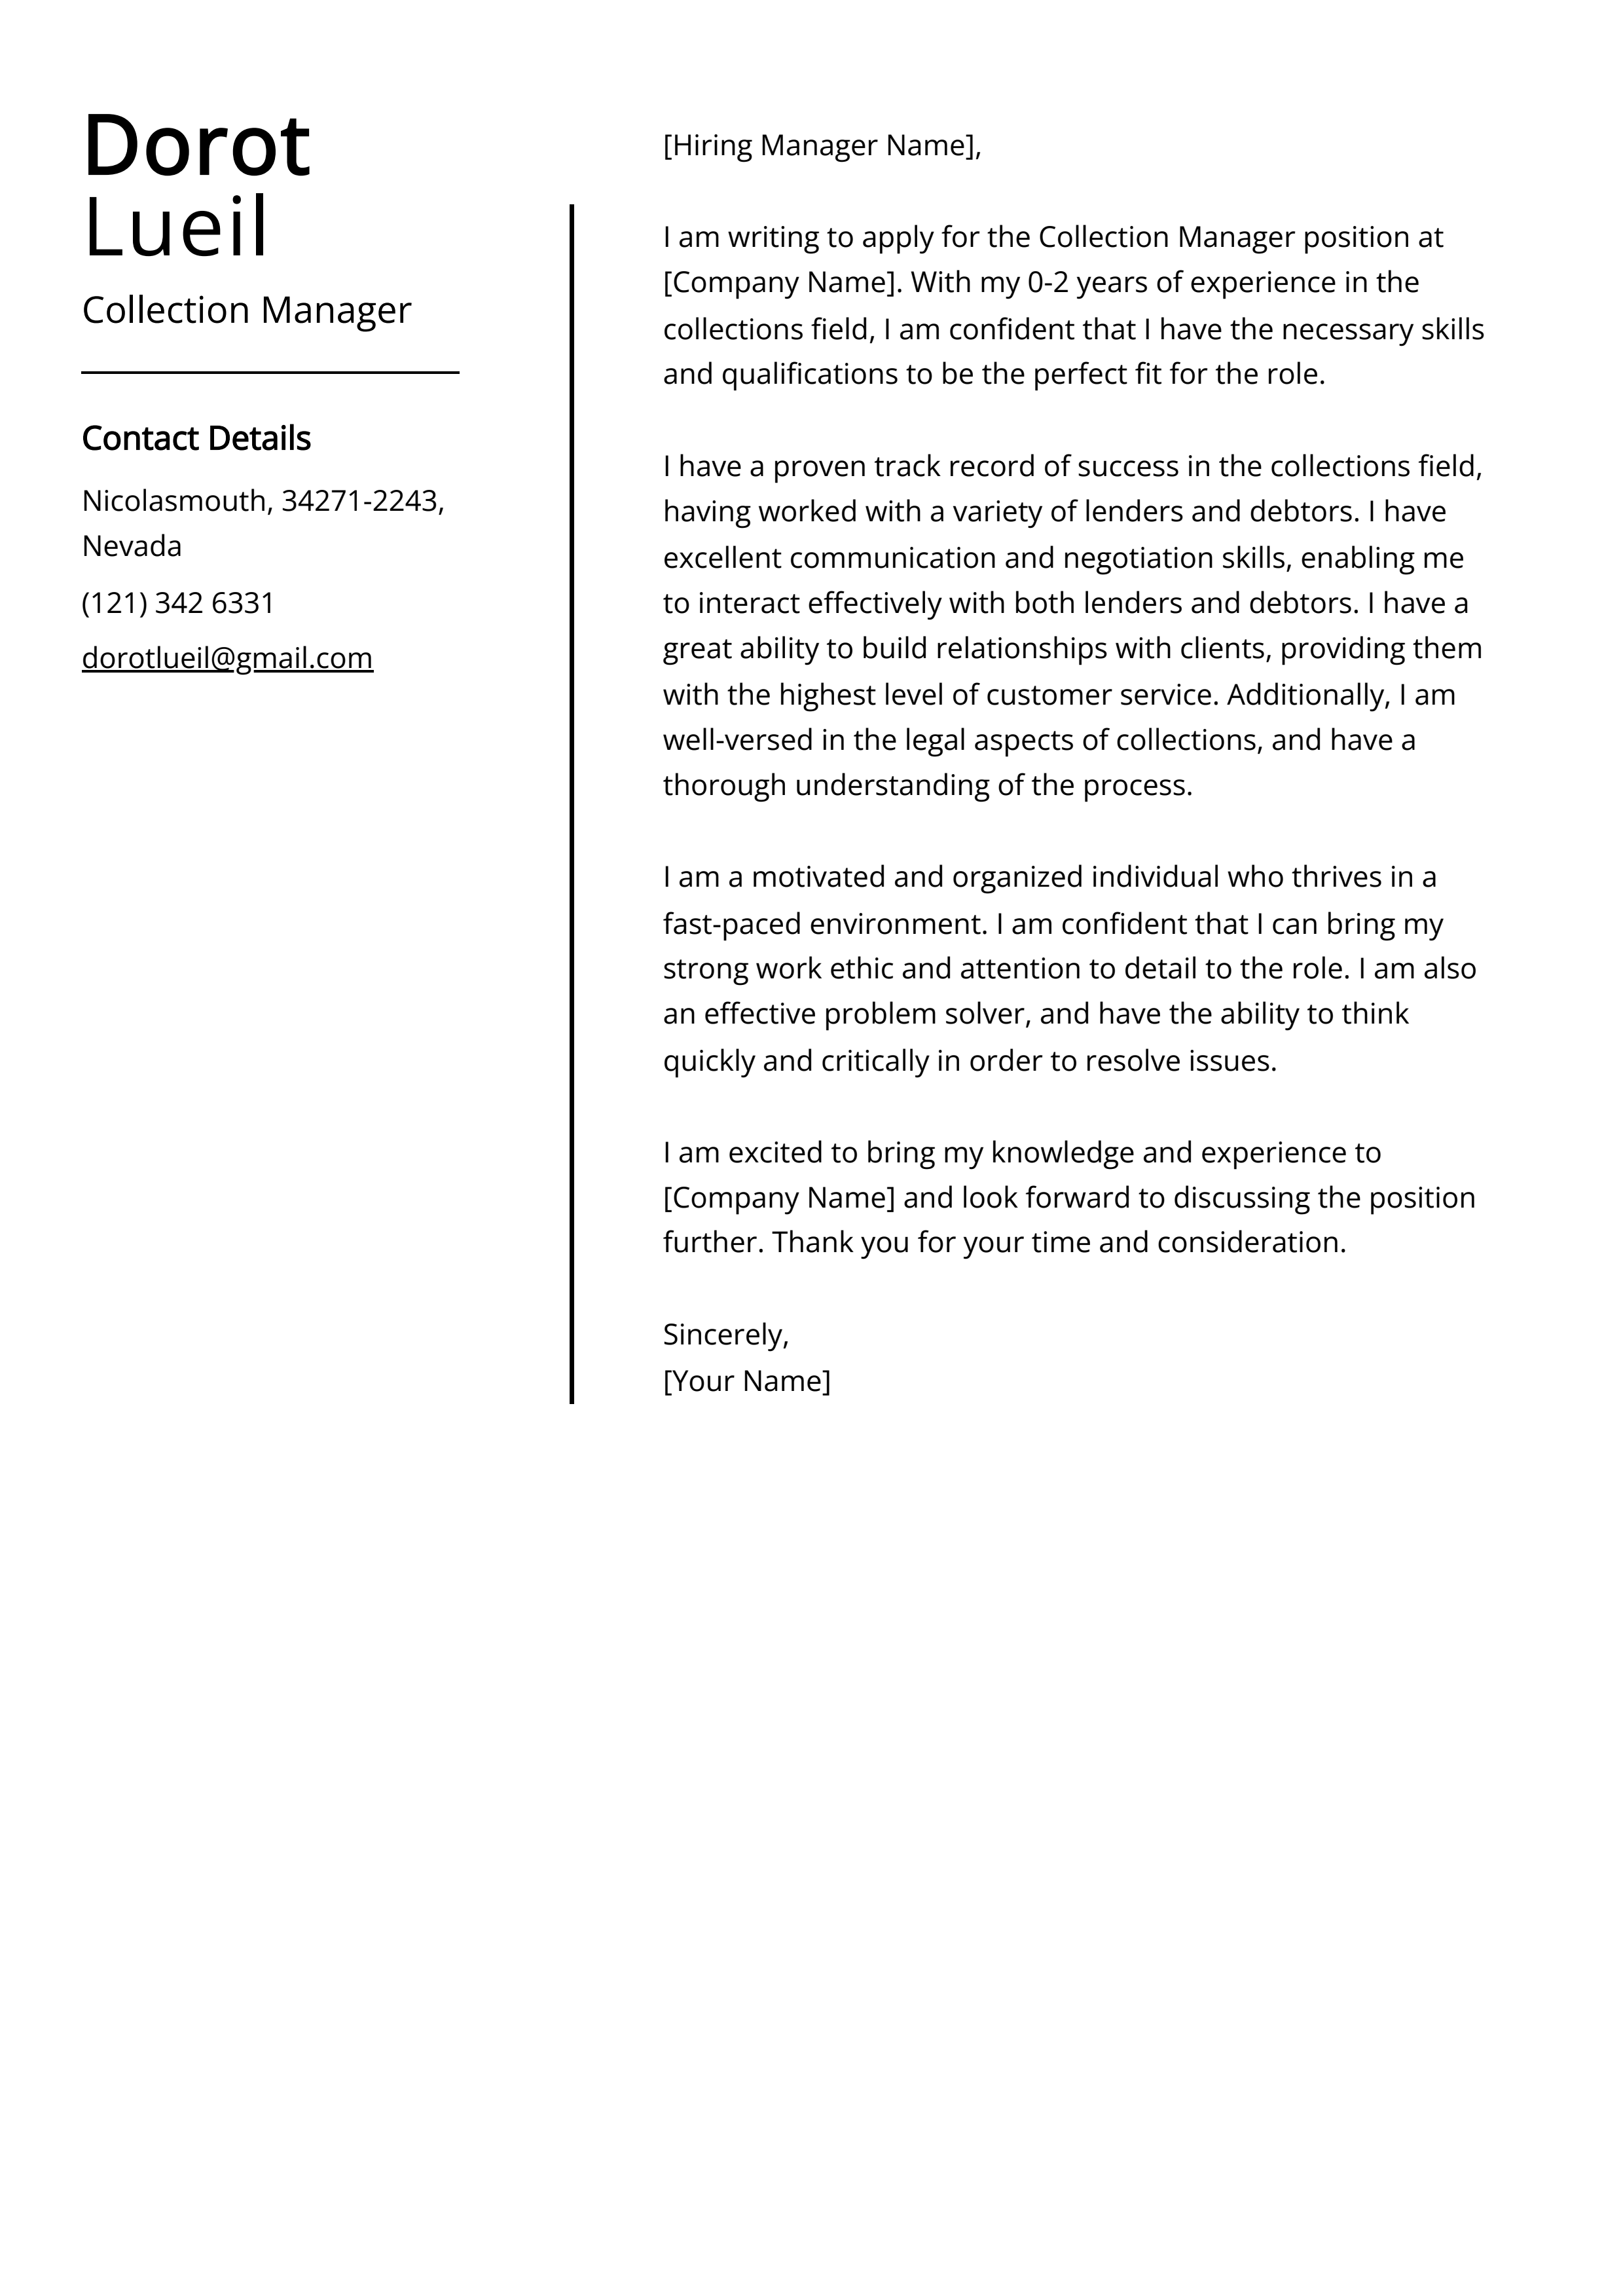 Collection Manager Cover Letter Example